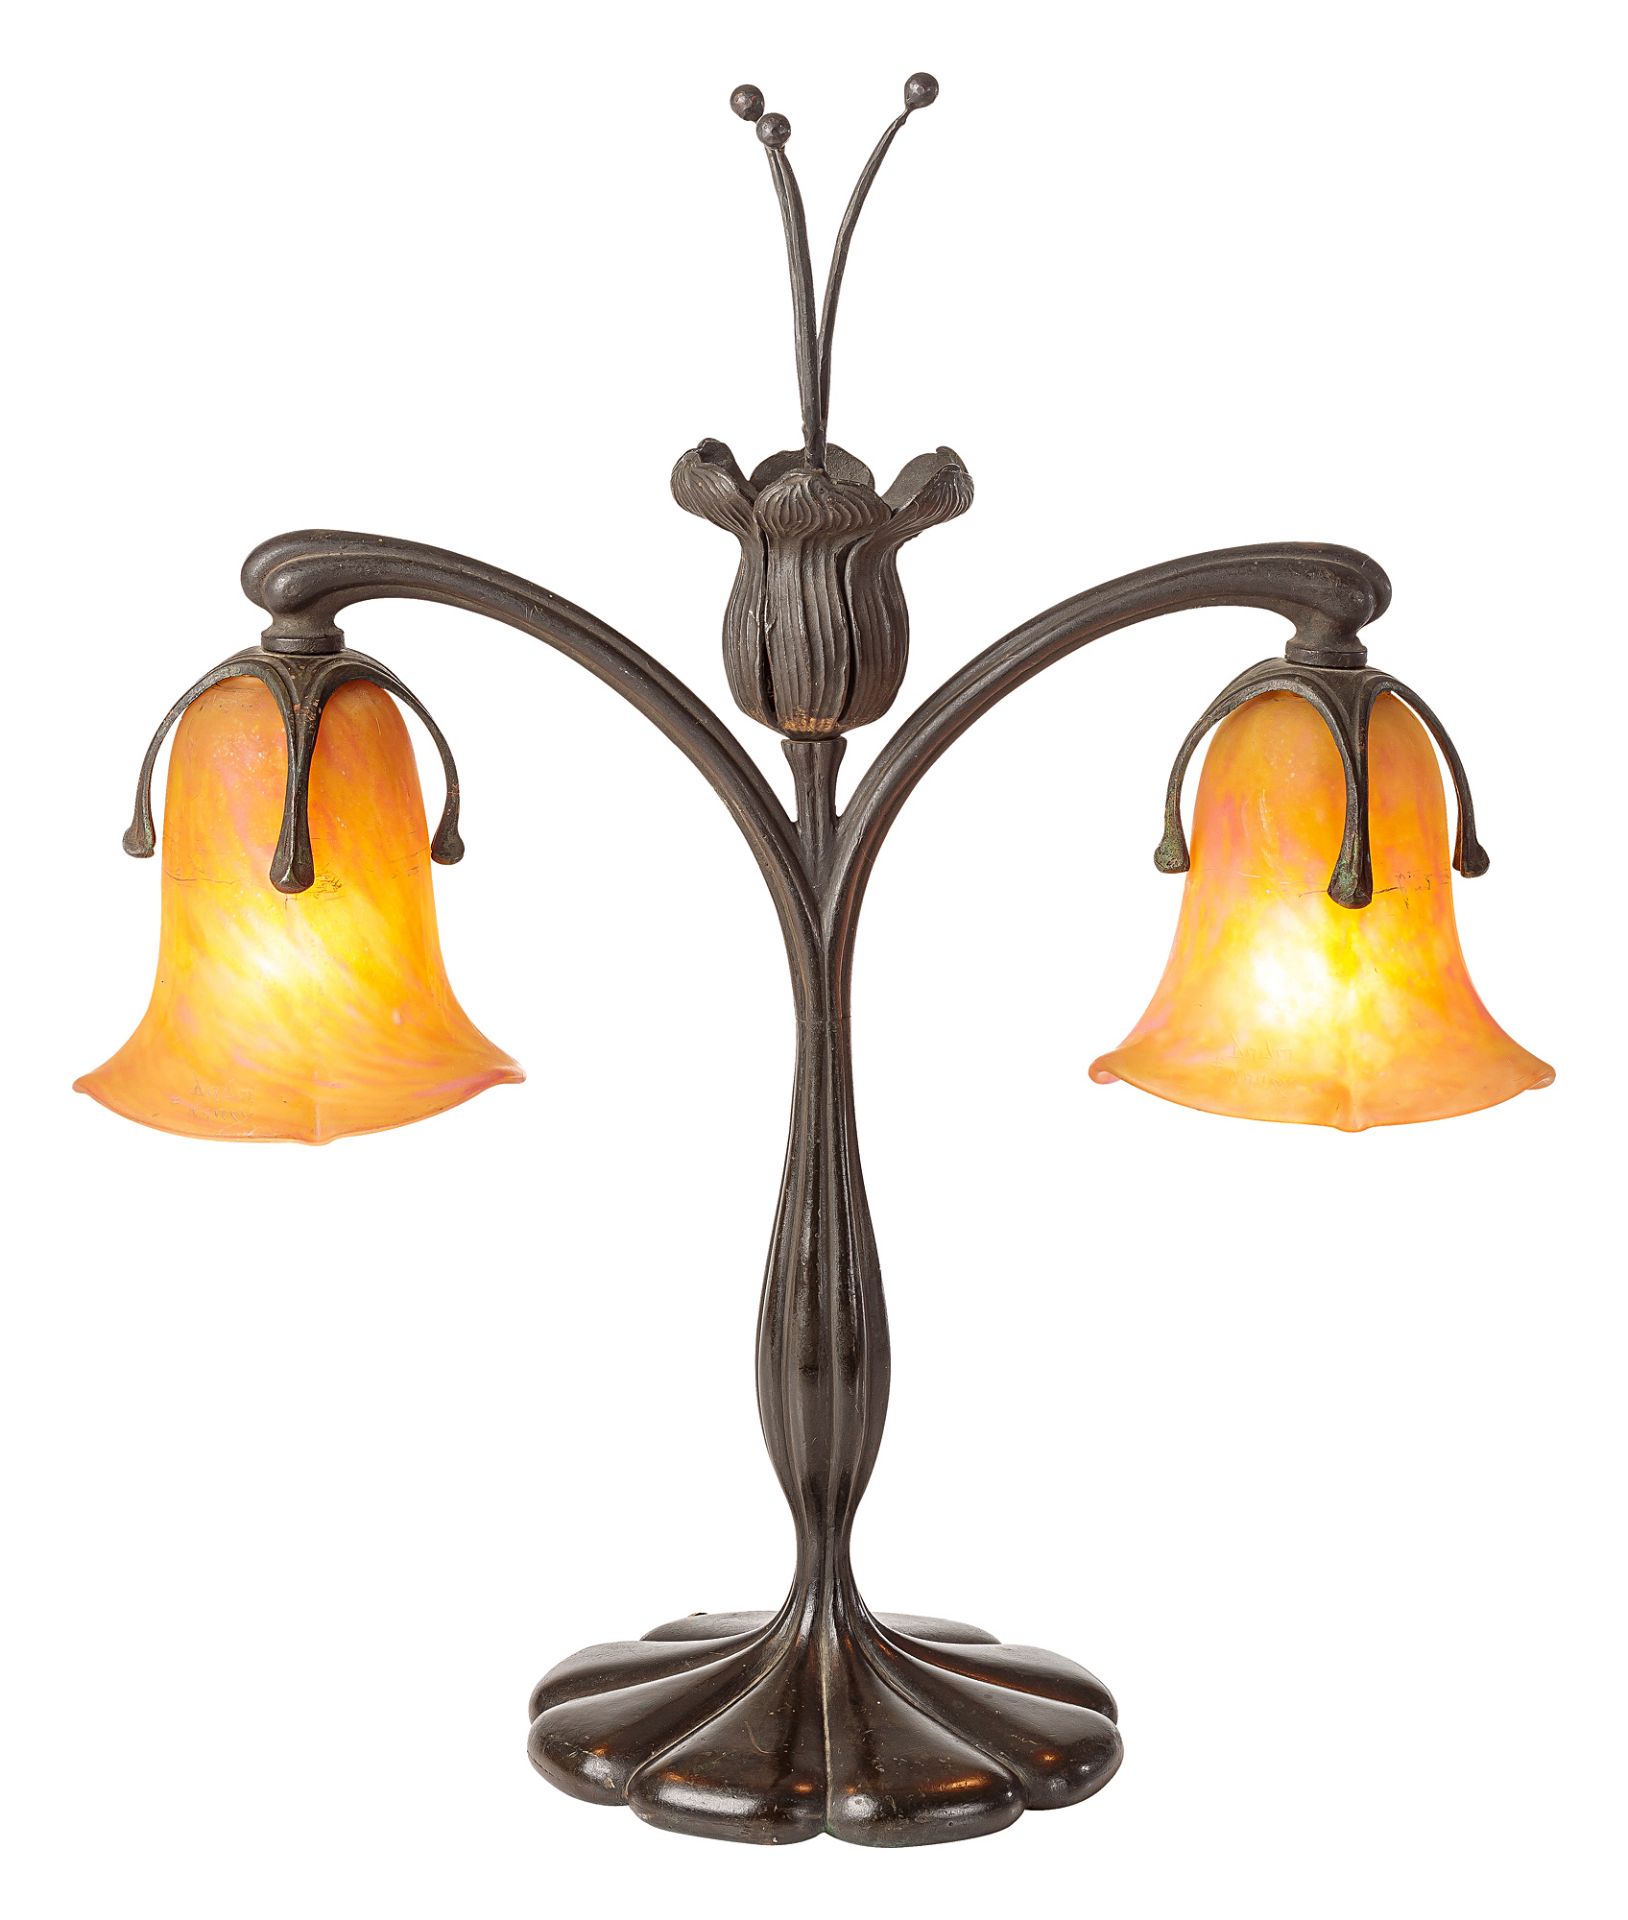 Two-light Daum Frères table lamp